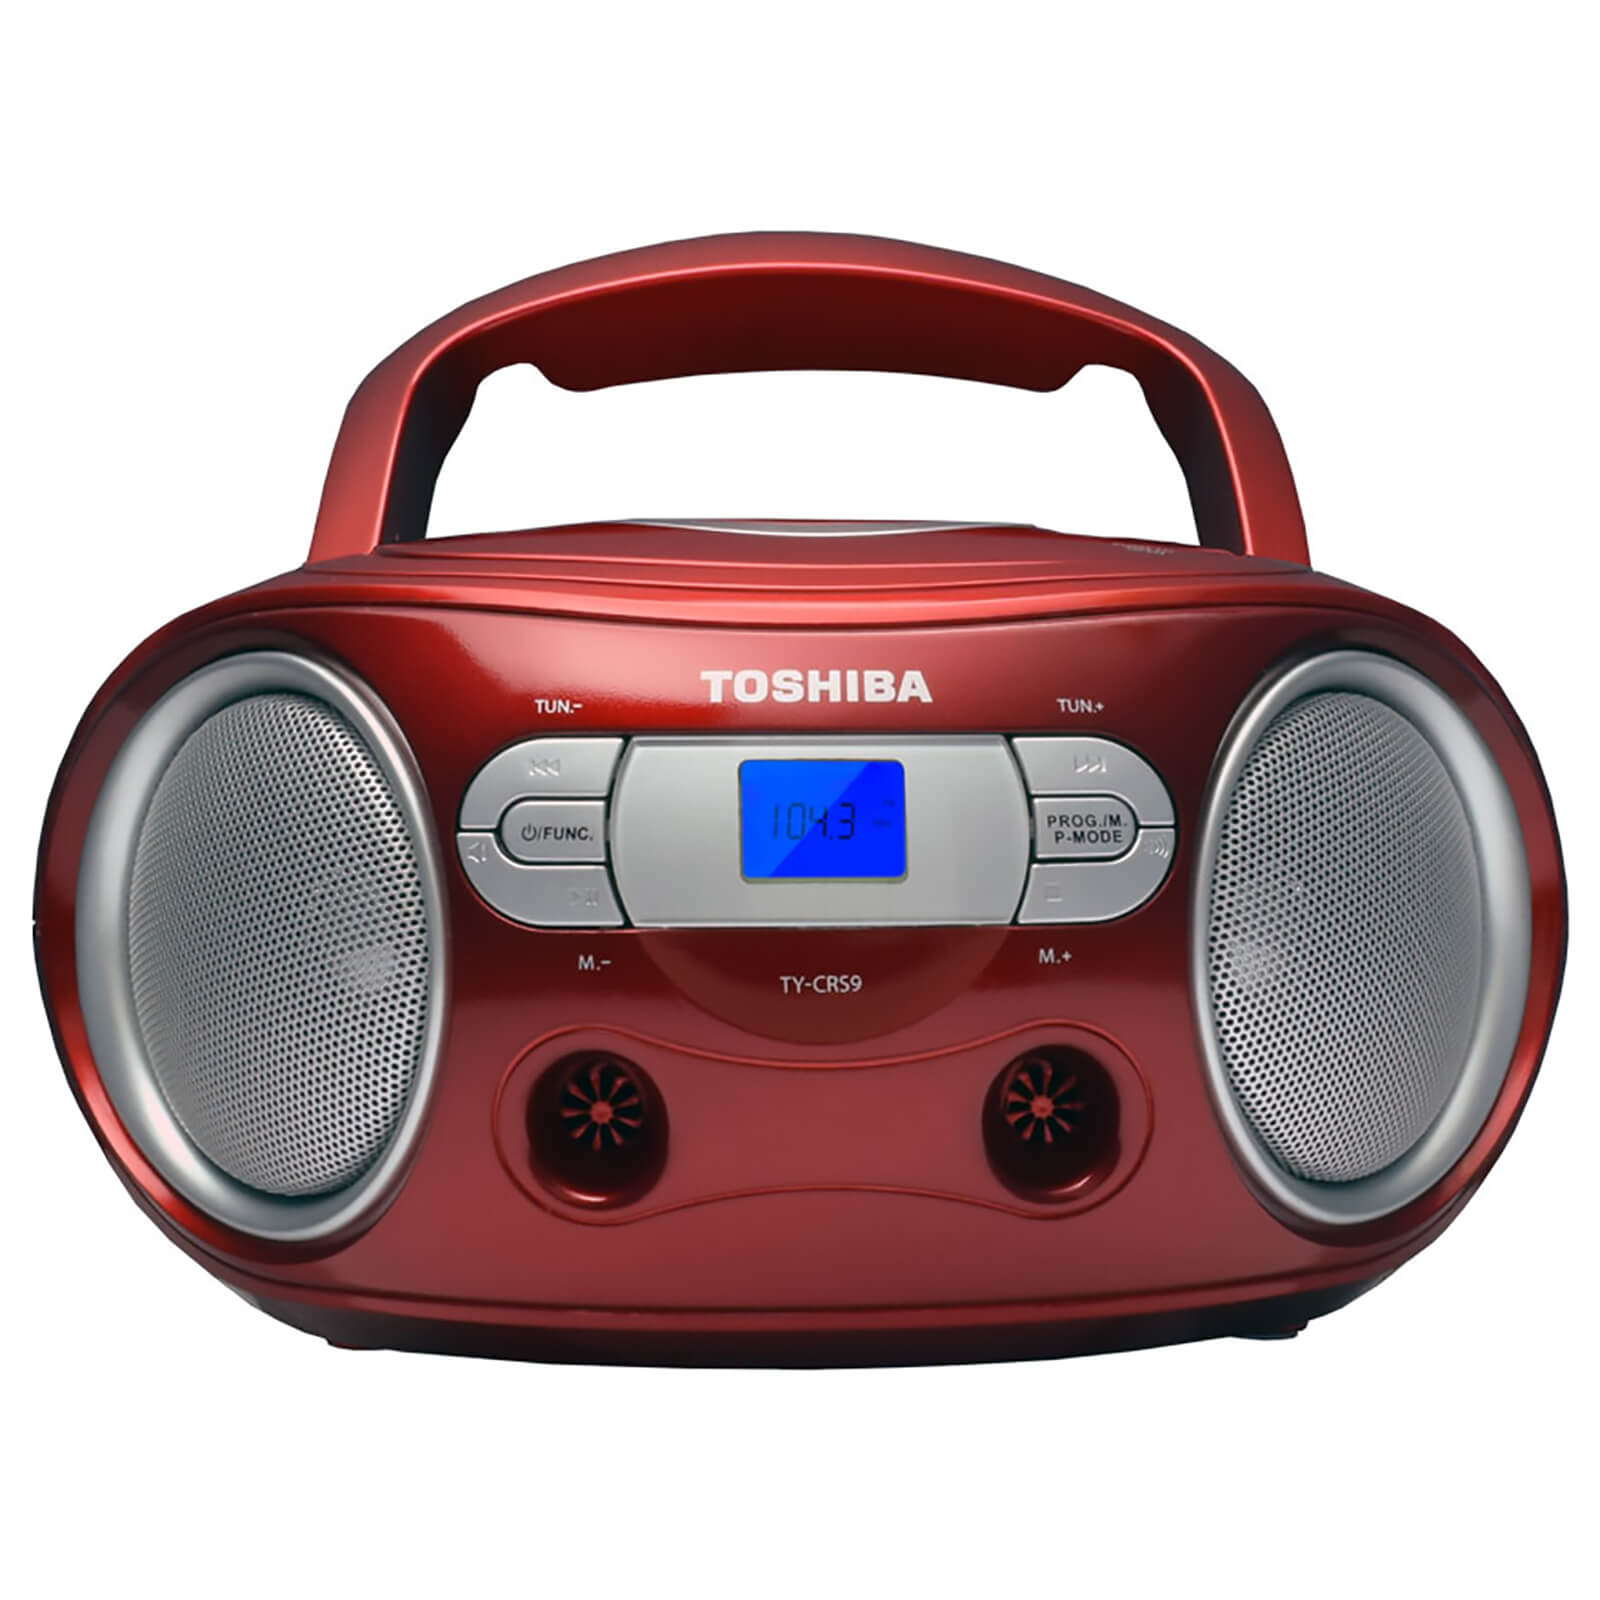 Toshiba Portable CD Boombox - Red